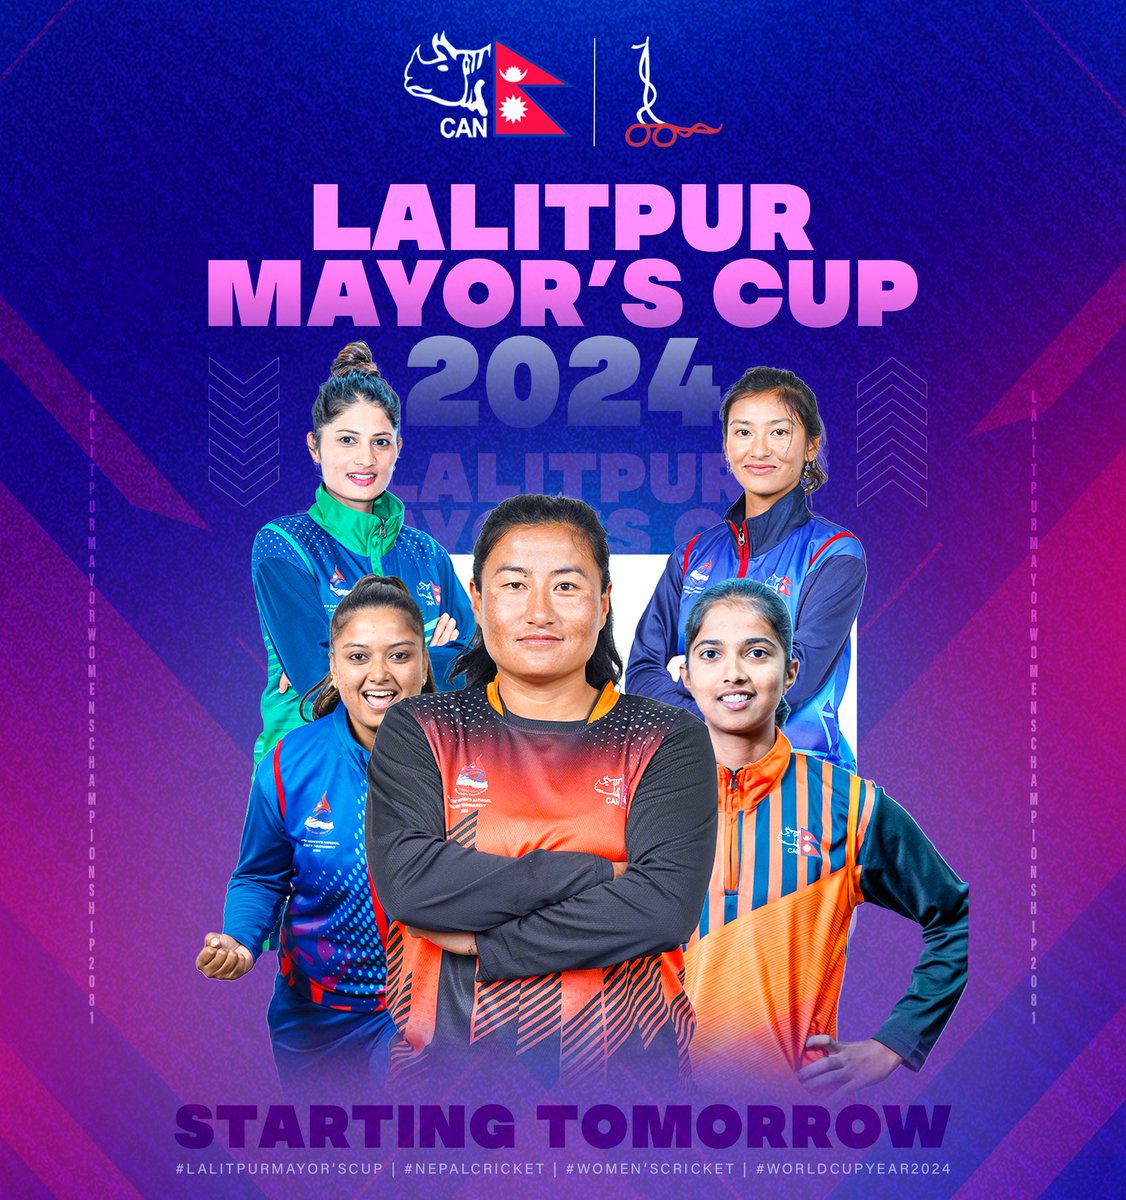 Buckle up for domestic action as Lalitpur Mayor's Cup 2024 takes center stage at the Scenic TU Ground tomorrow! 🏏🇳🇵

#HerGameToo | #WomensCricket | #NepalCricket